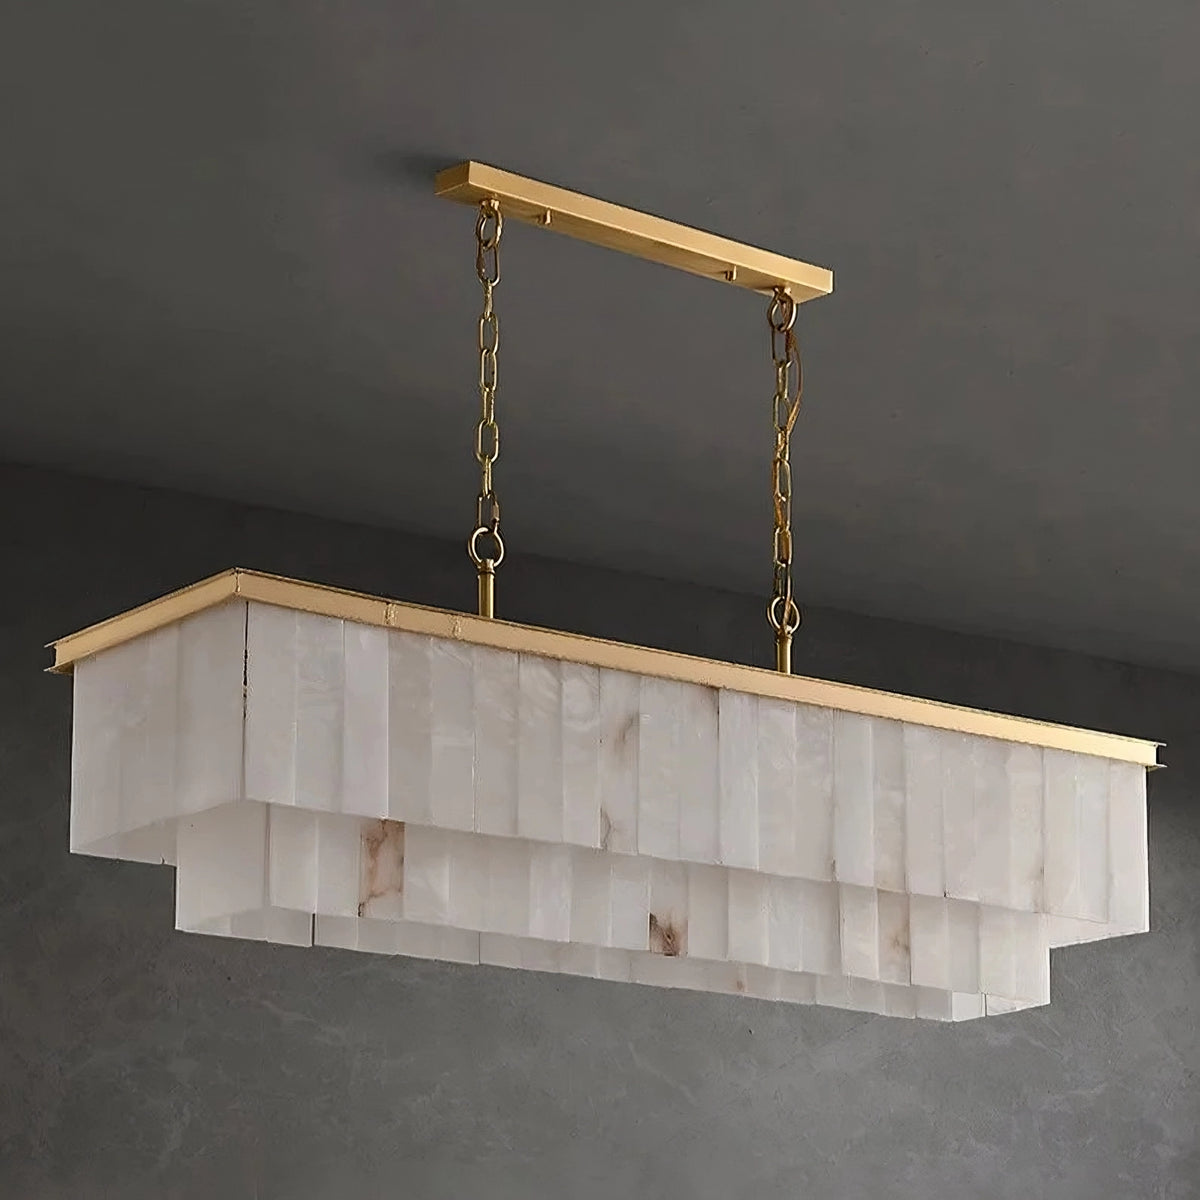 A modern rectangular Shopp578 Natural Calcite Dining Room Chandelier with a brass frame and chains, featuring cascading layers of translucent natural calcite or glass panels. It hangs from a matching gold ceiling mount against a dark gray background.